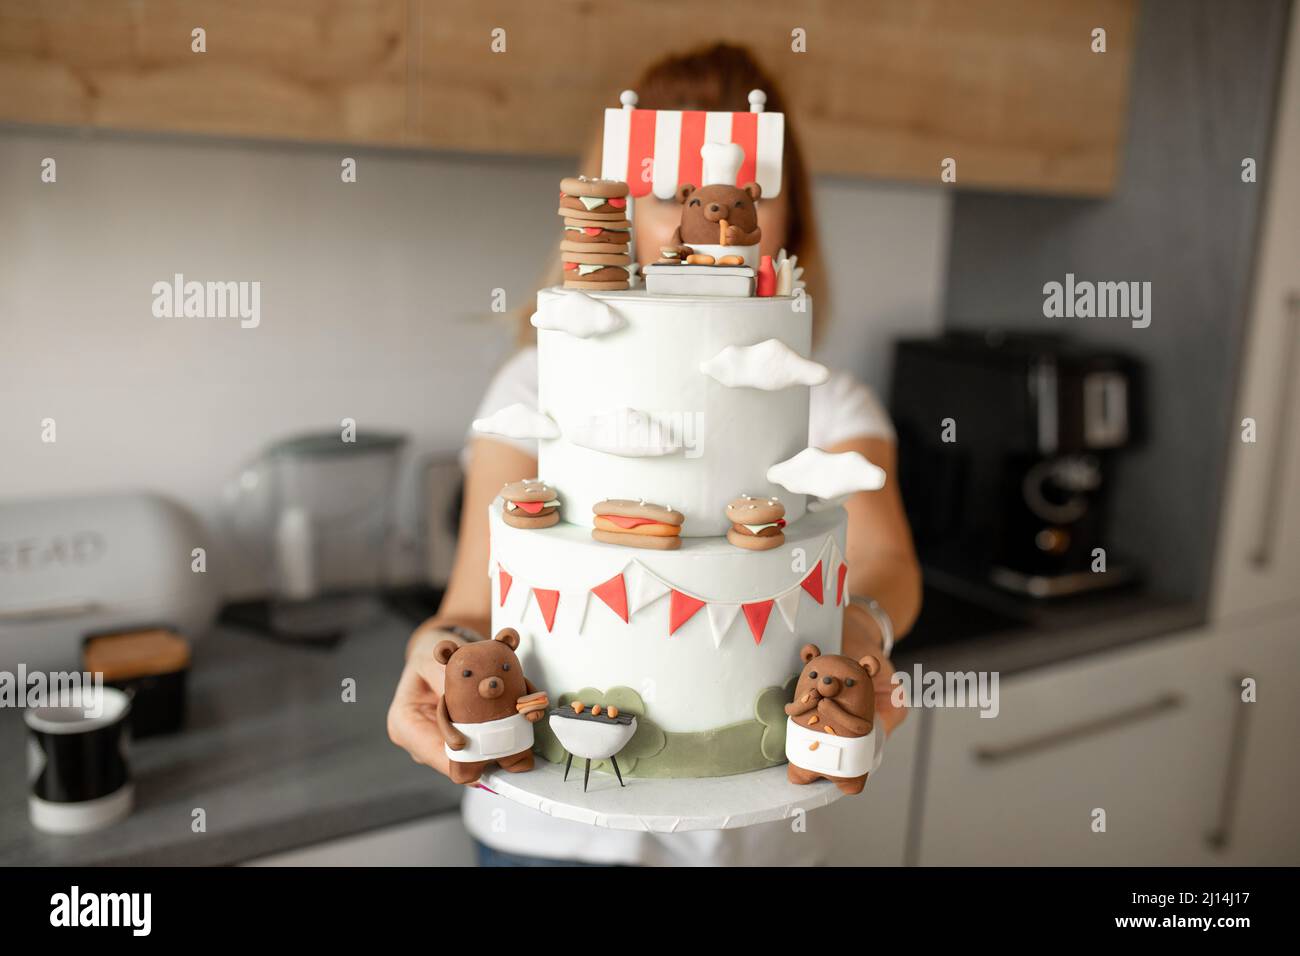 Woman standing at kitchen and hold a big birthday cake ...